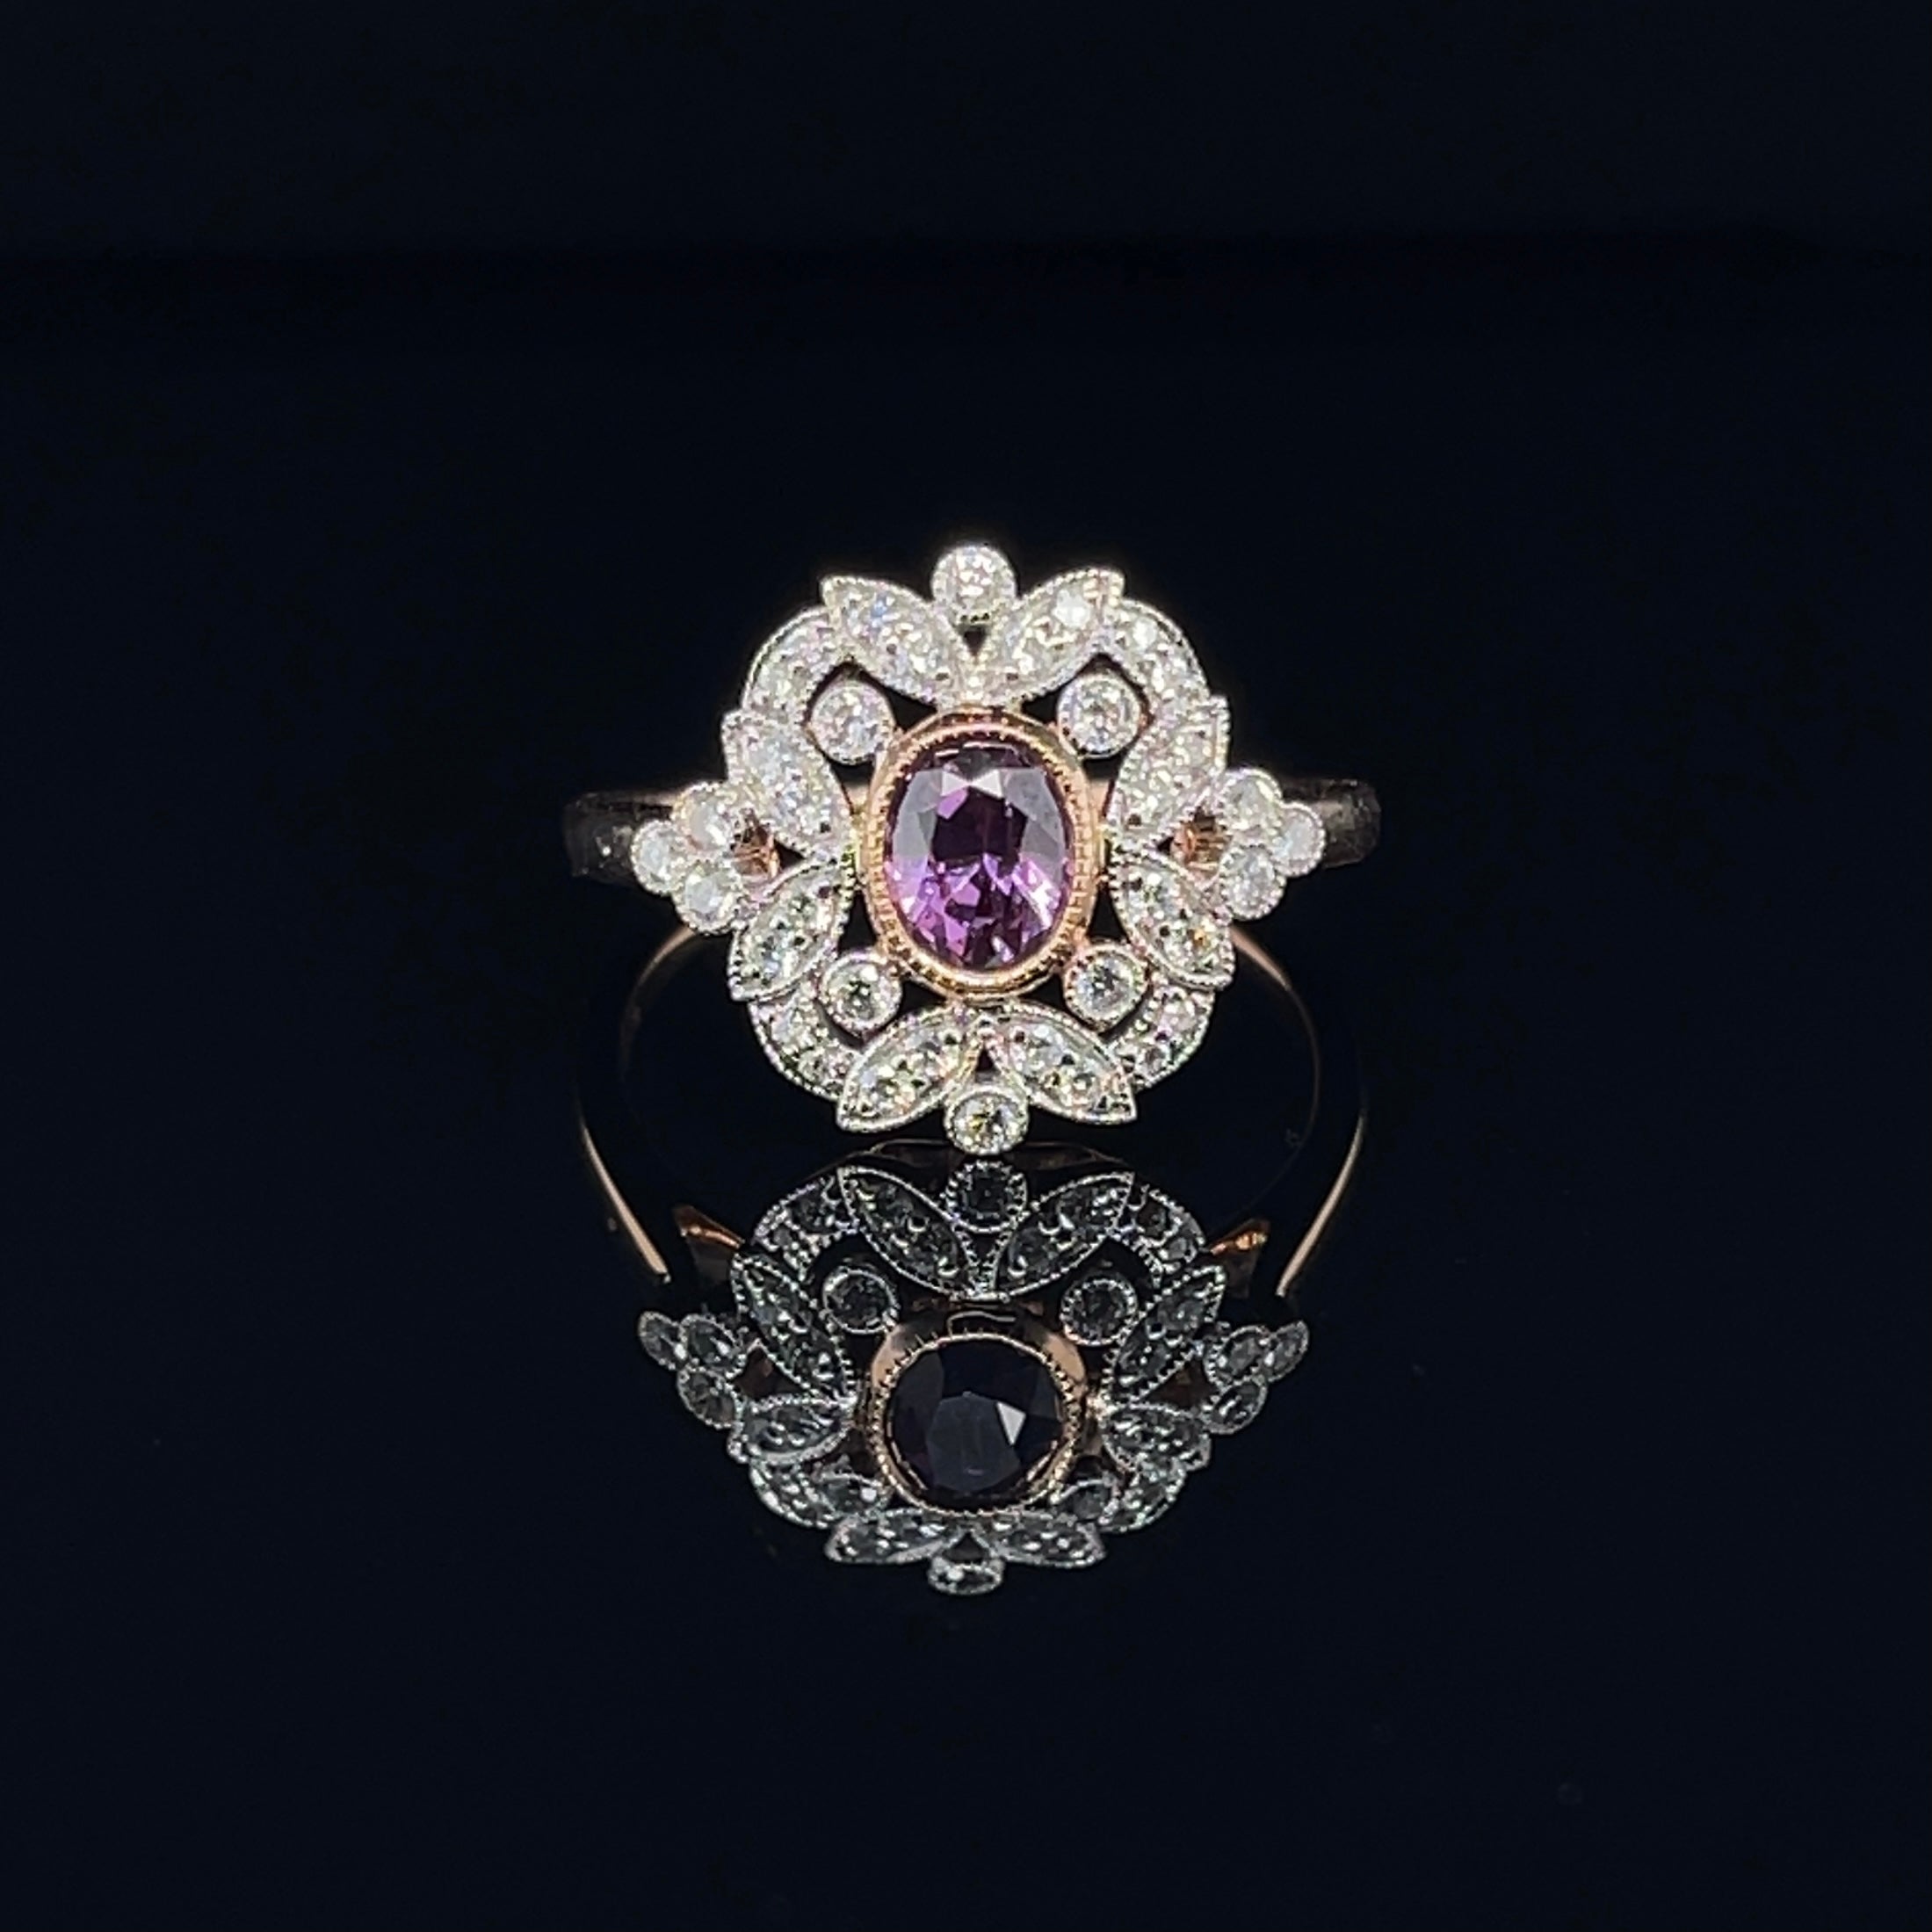 For Sale:  18ct Rose Gold 'No Heat' Pink Sapphire and Diamond Ring 8